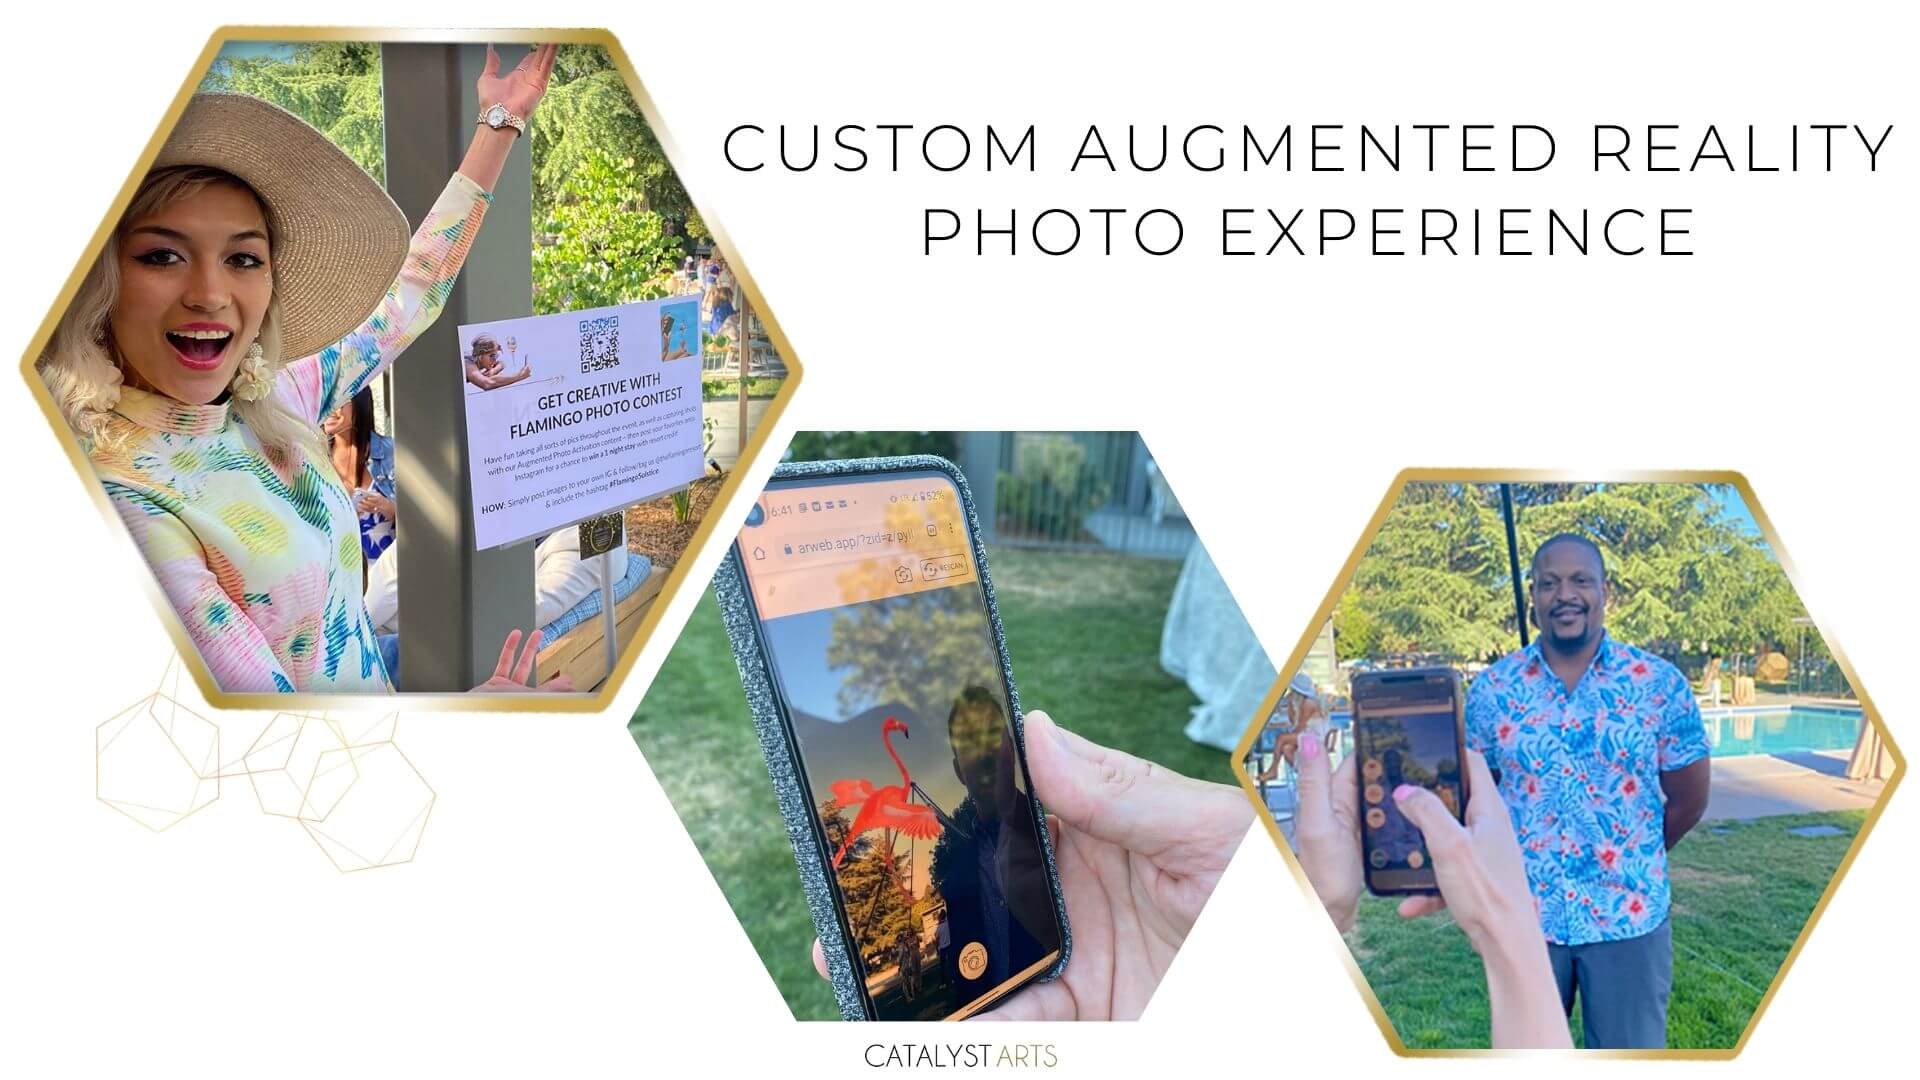 Custom Augmented Reality Activation AR Photo Experience at live event in California from Catalyst Arts